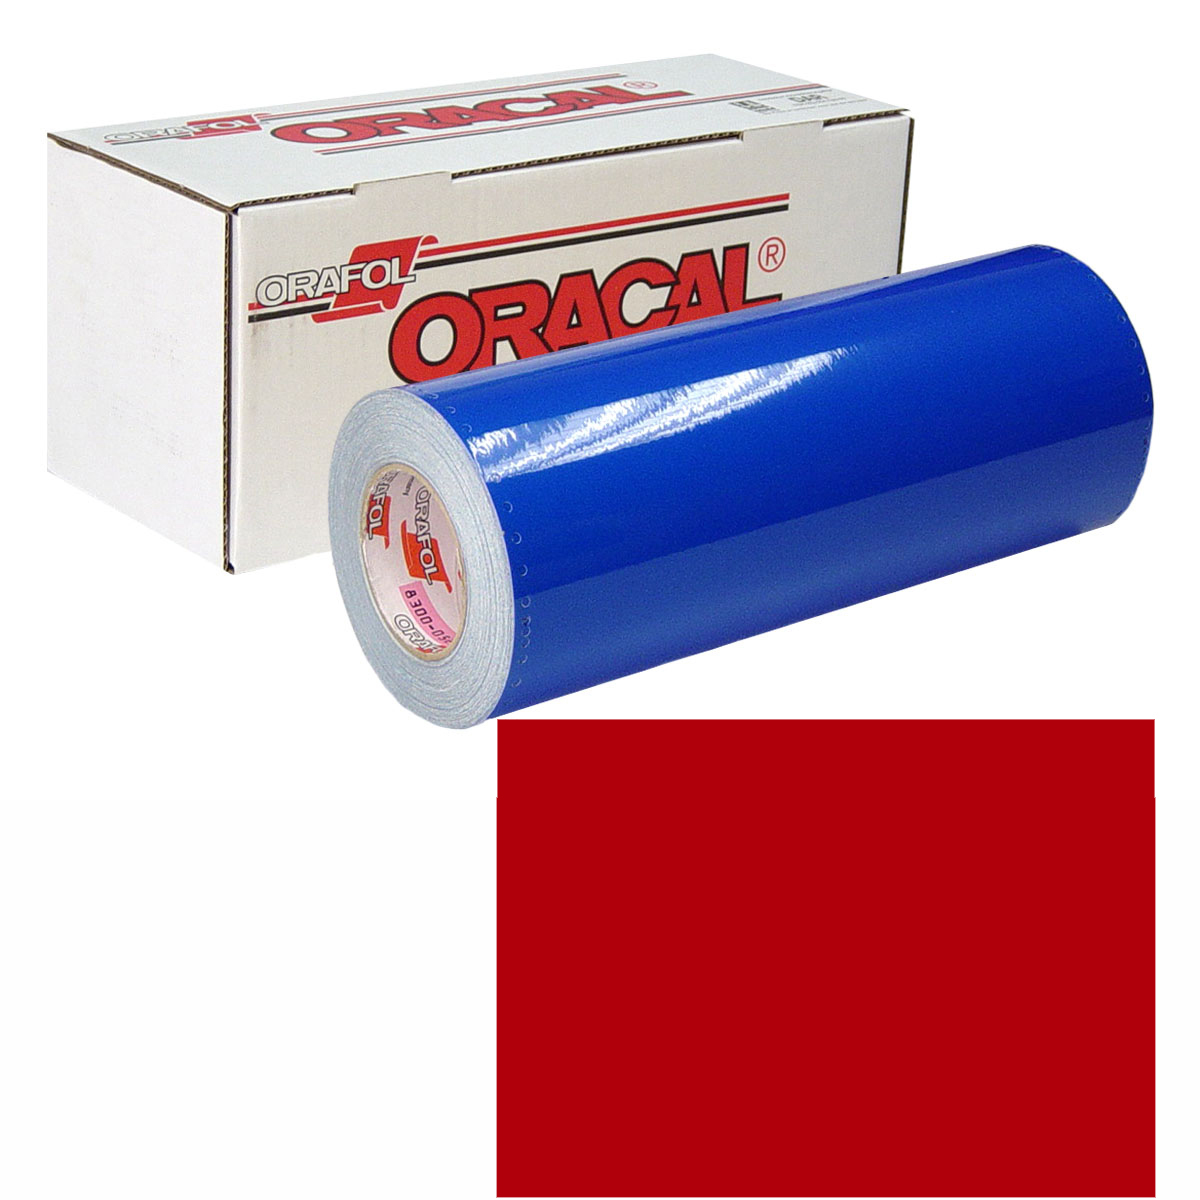 ORACAL 631 30in X 10yd 031 Red